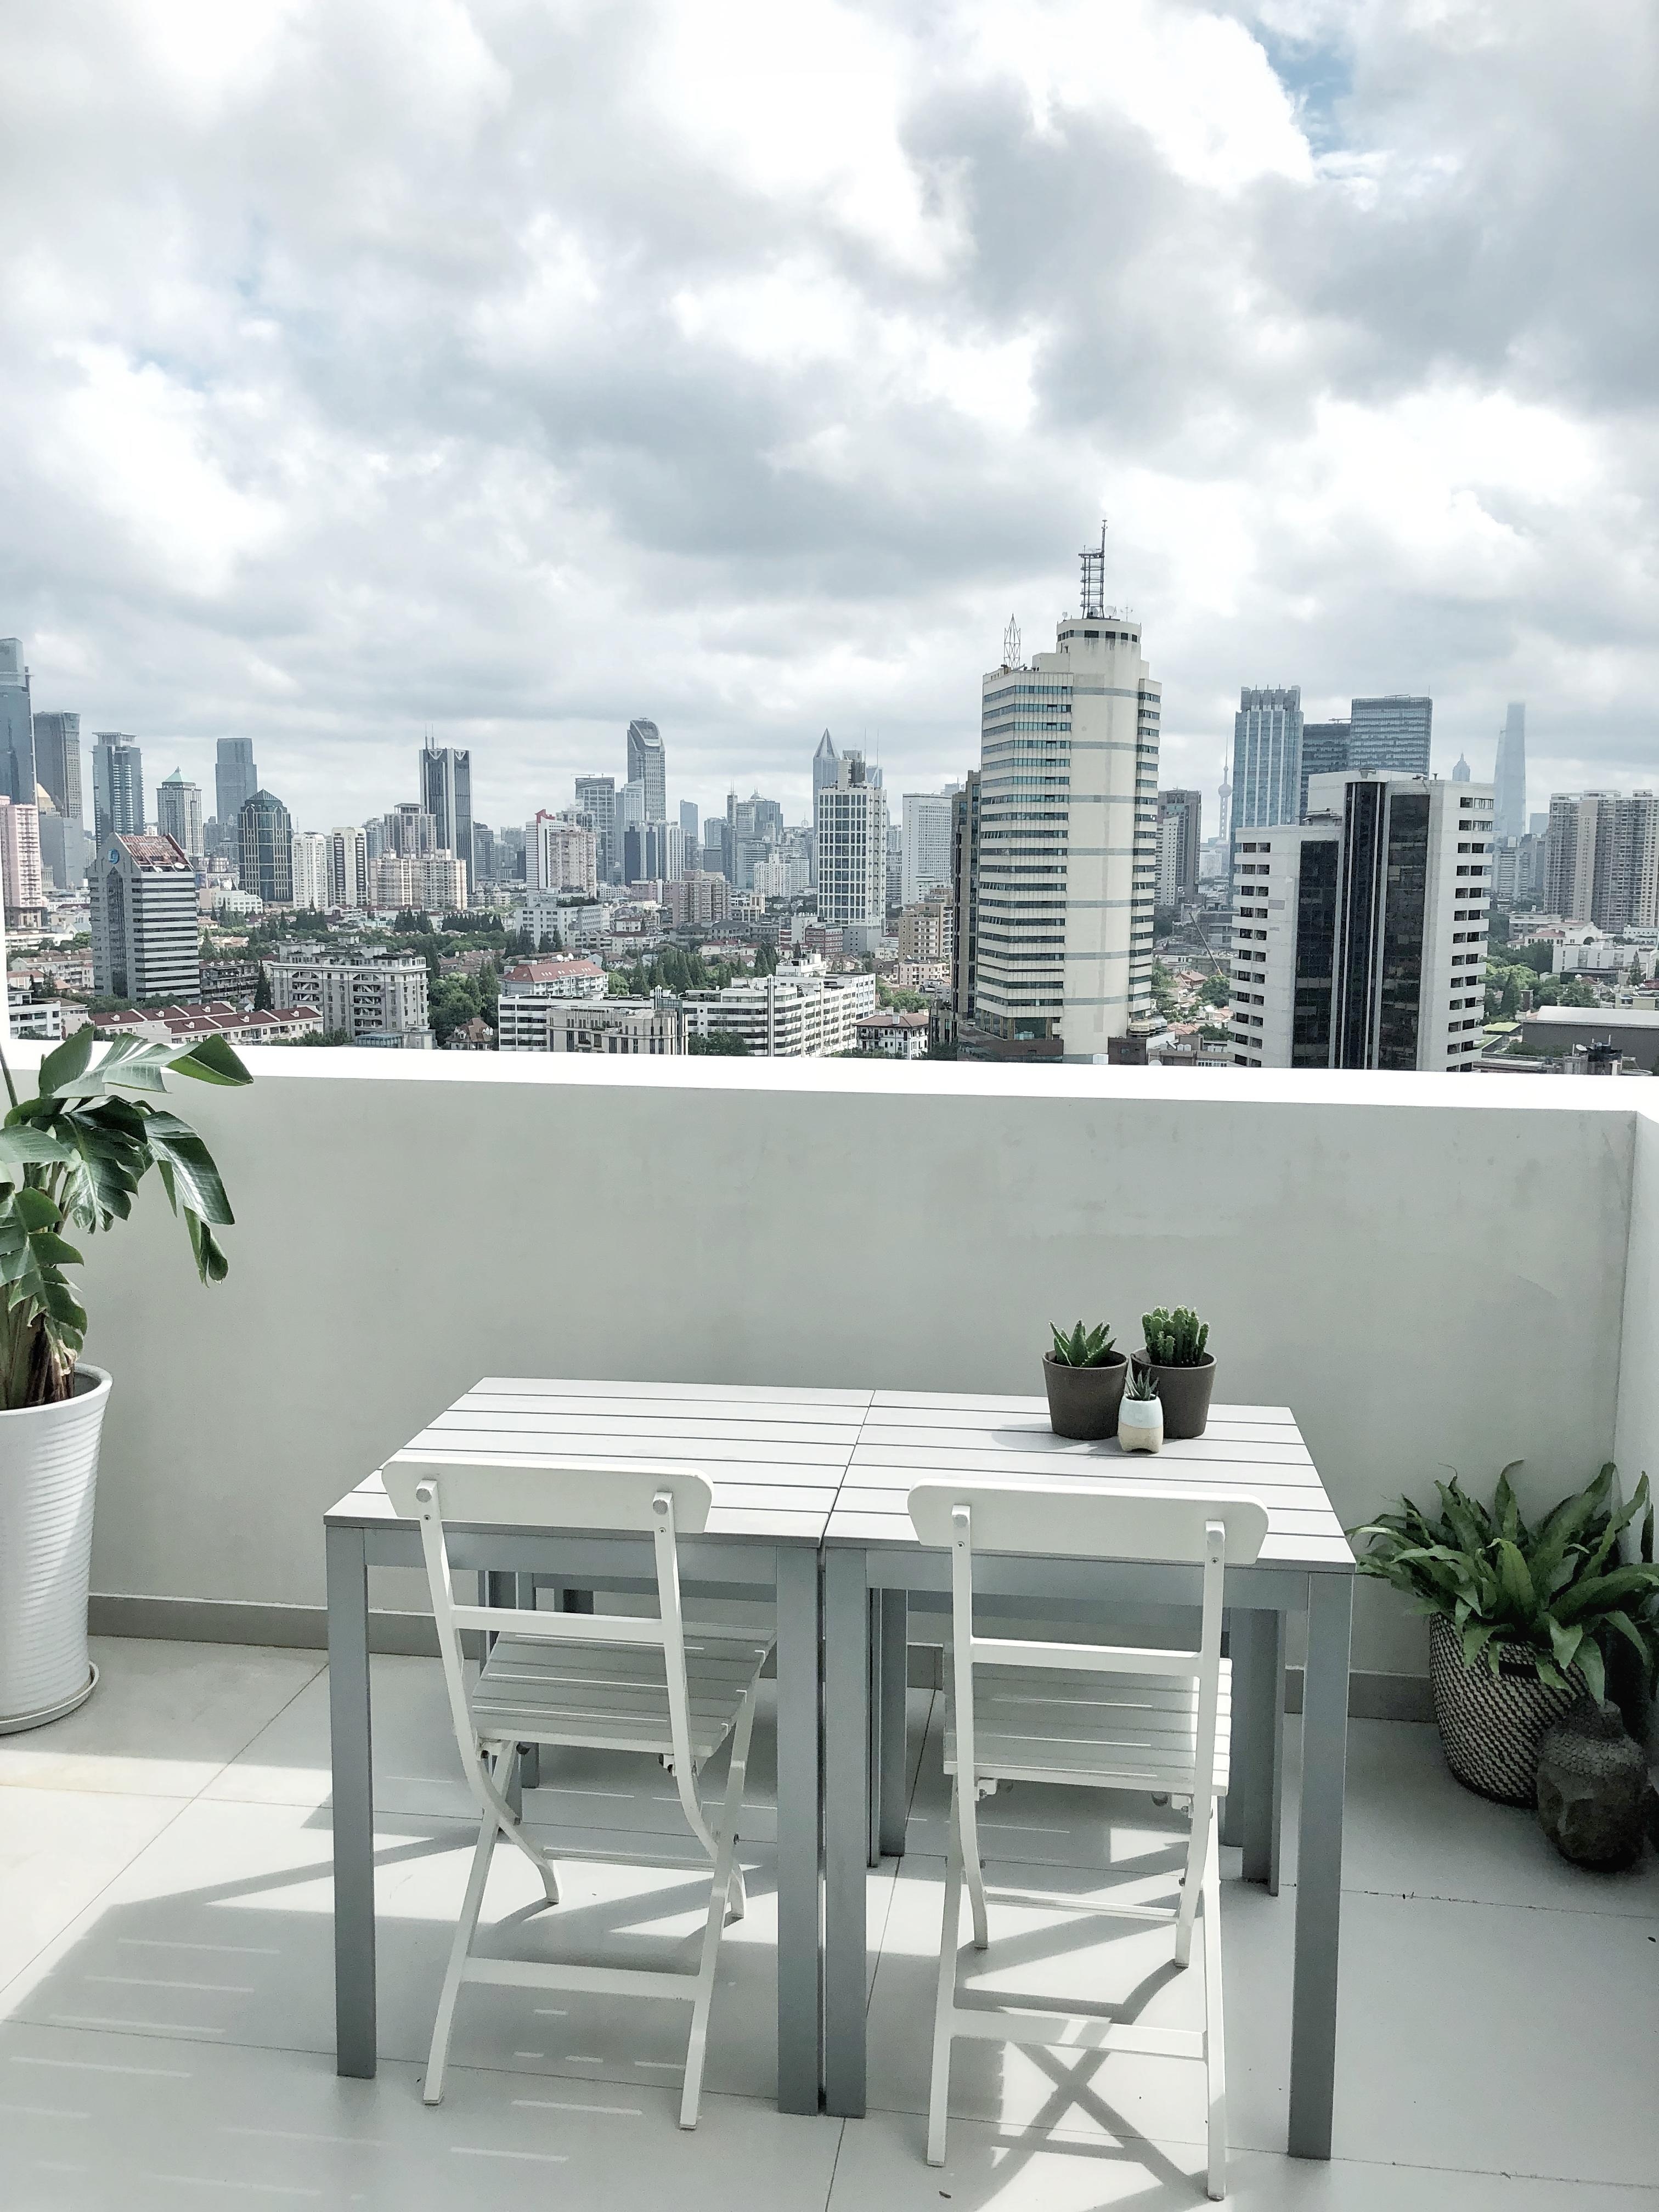 Hello from the other side!
#china#shanghai#urbanjungle#whitehome#whiteinterior